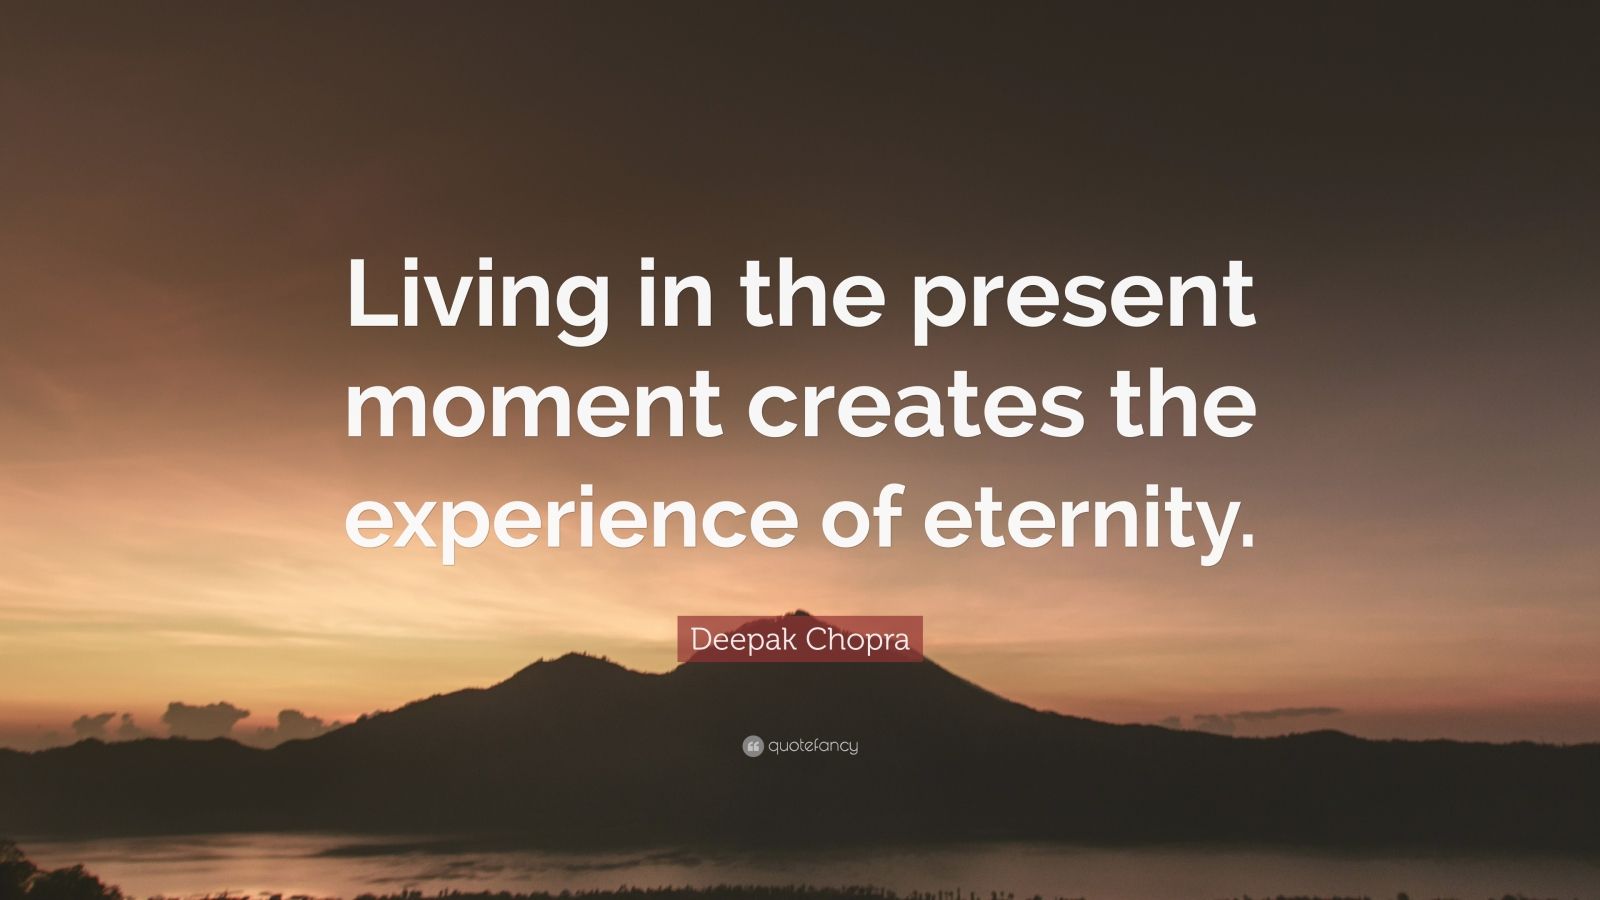 Deepak Chopra Quote: “Living in the present moment creates the